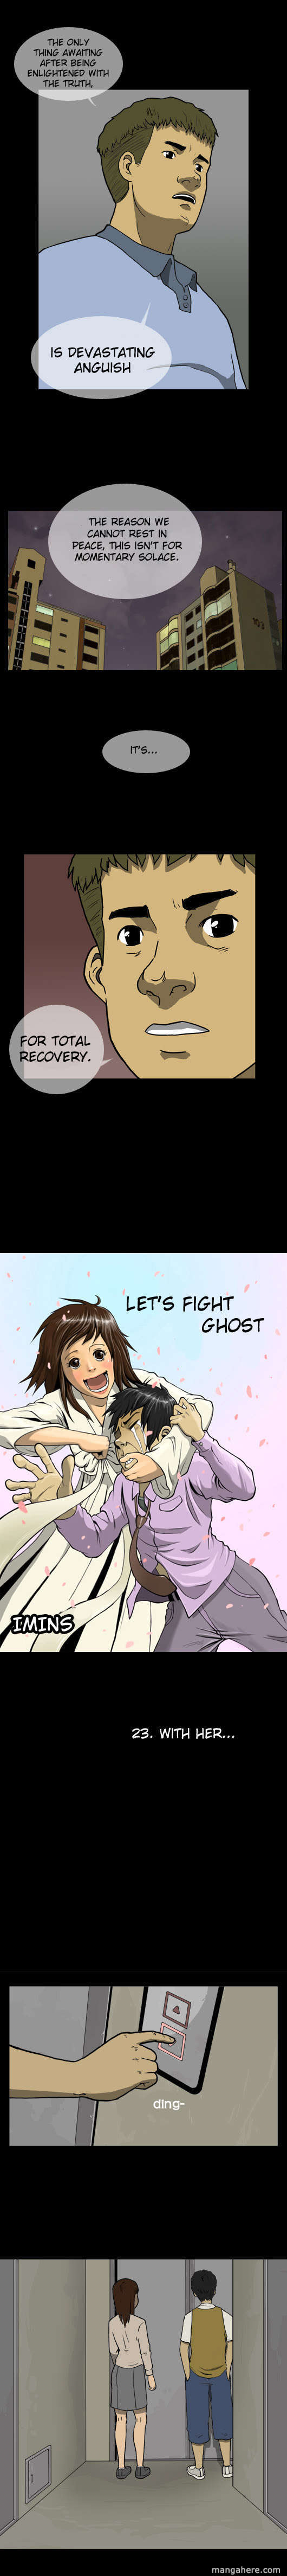 Let's Fight Ghost 23